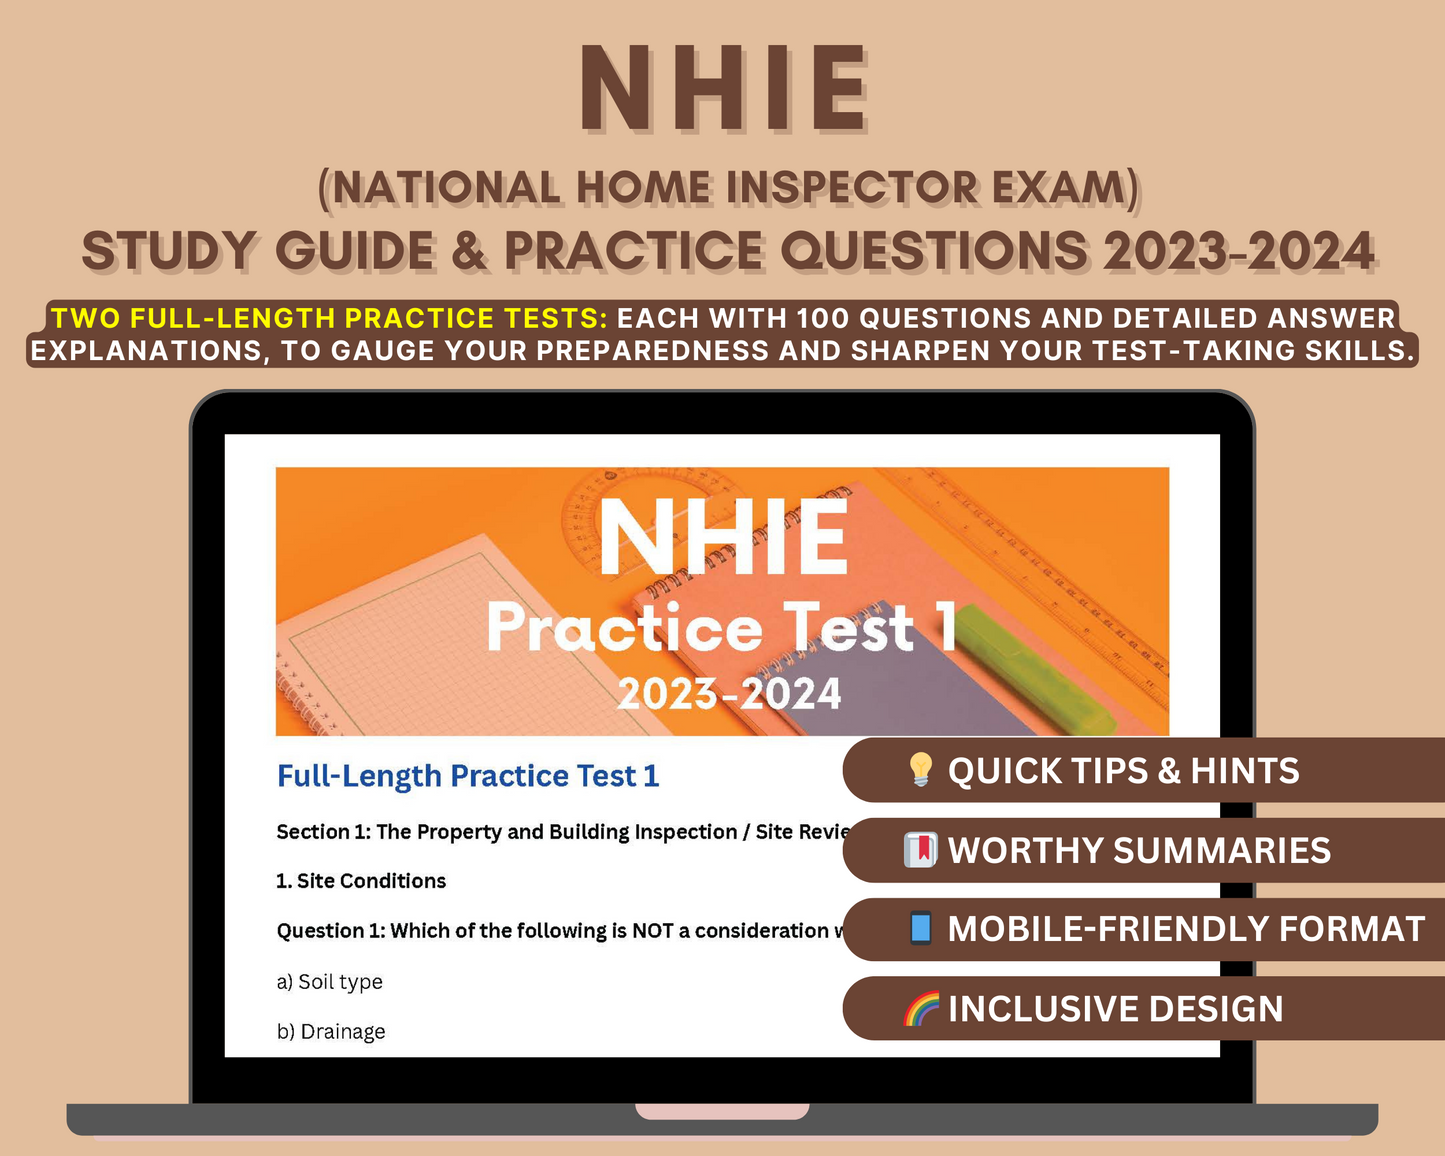 National Home Inspector Exam Study Guide 2023-24: In-Depth Content Review, Practice Test & Exam Tips for Home Inspectors